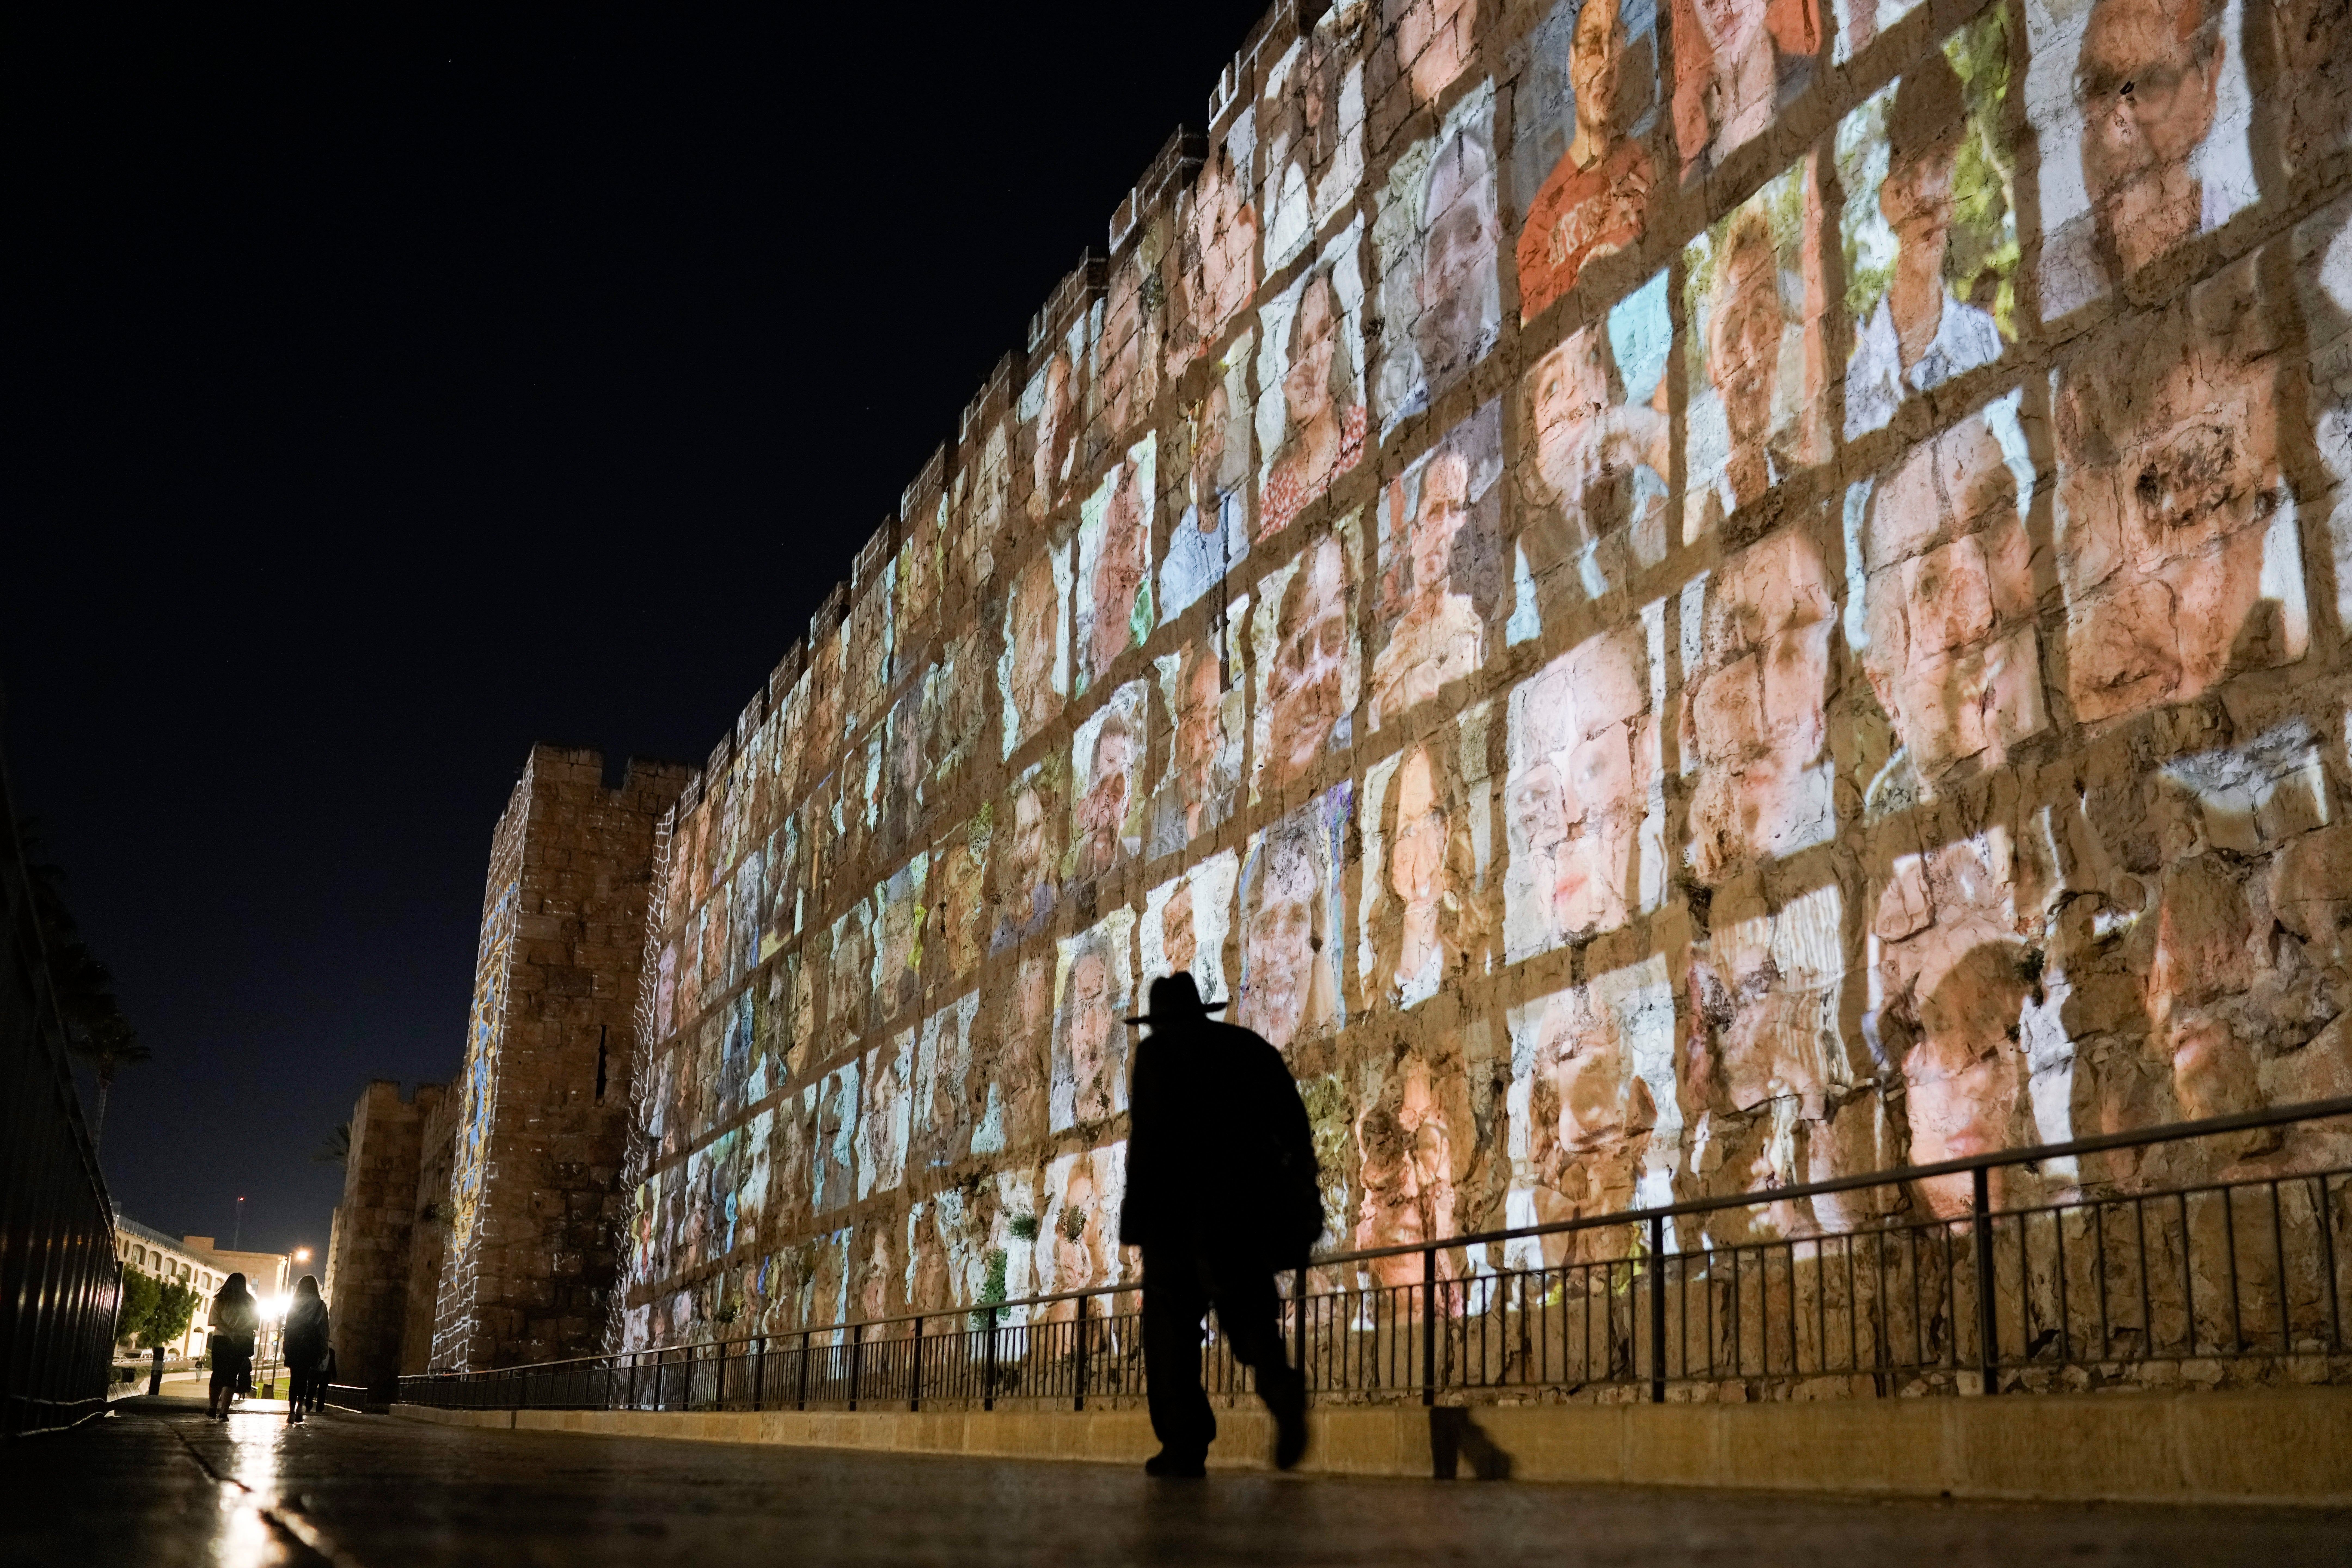 Photographs of Israeli hostages being held by Hamas militants are projected on the walls of Jerusalem's Old City in November